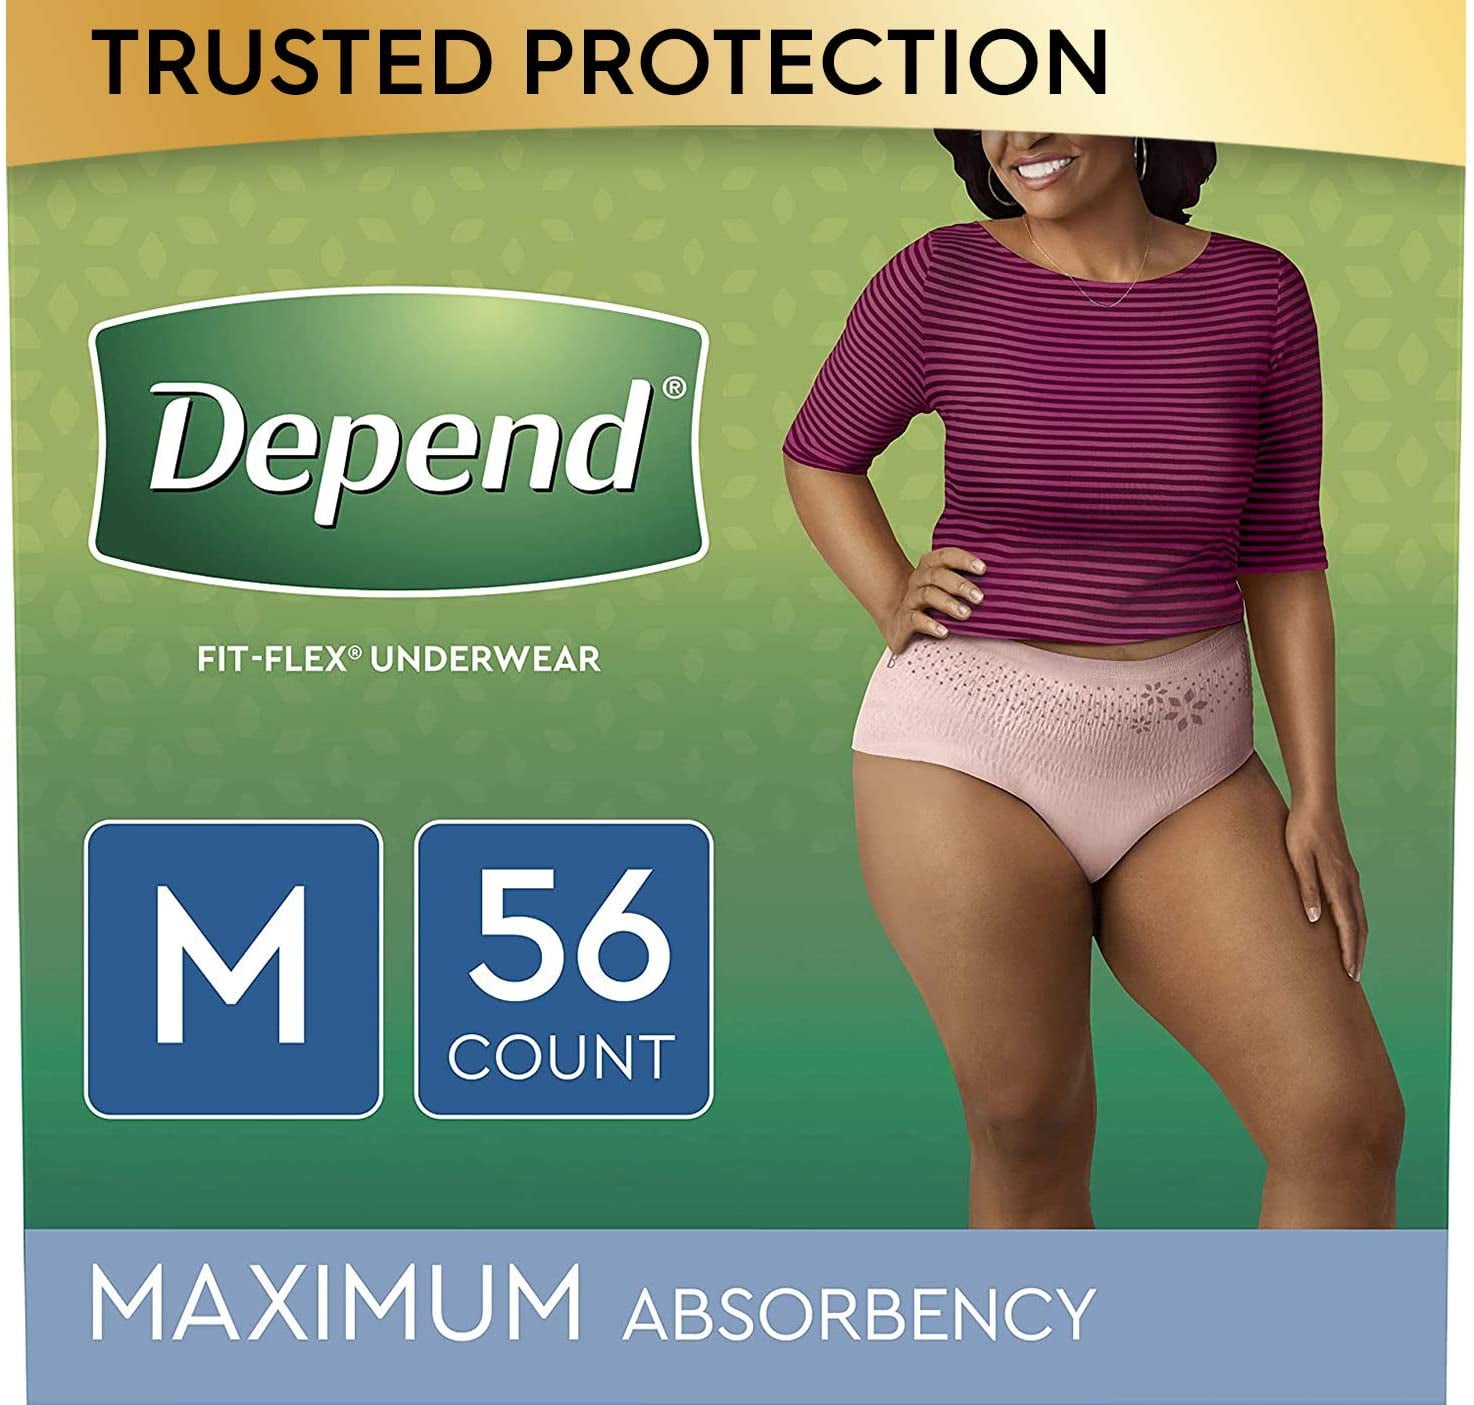 Depend FIT-FLEX Incontinence & Postpartum Underwear for Women, Disposable,  Maximum Absorbency, Medium, Blush, 56 Count (2 Packs of 28) (Packaging May  Vary) 